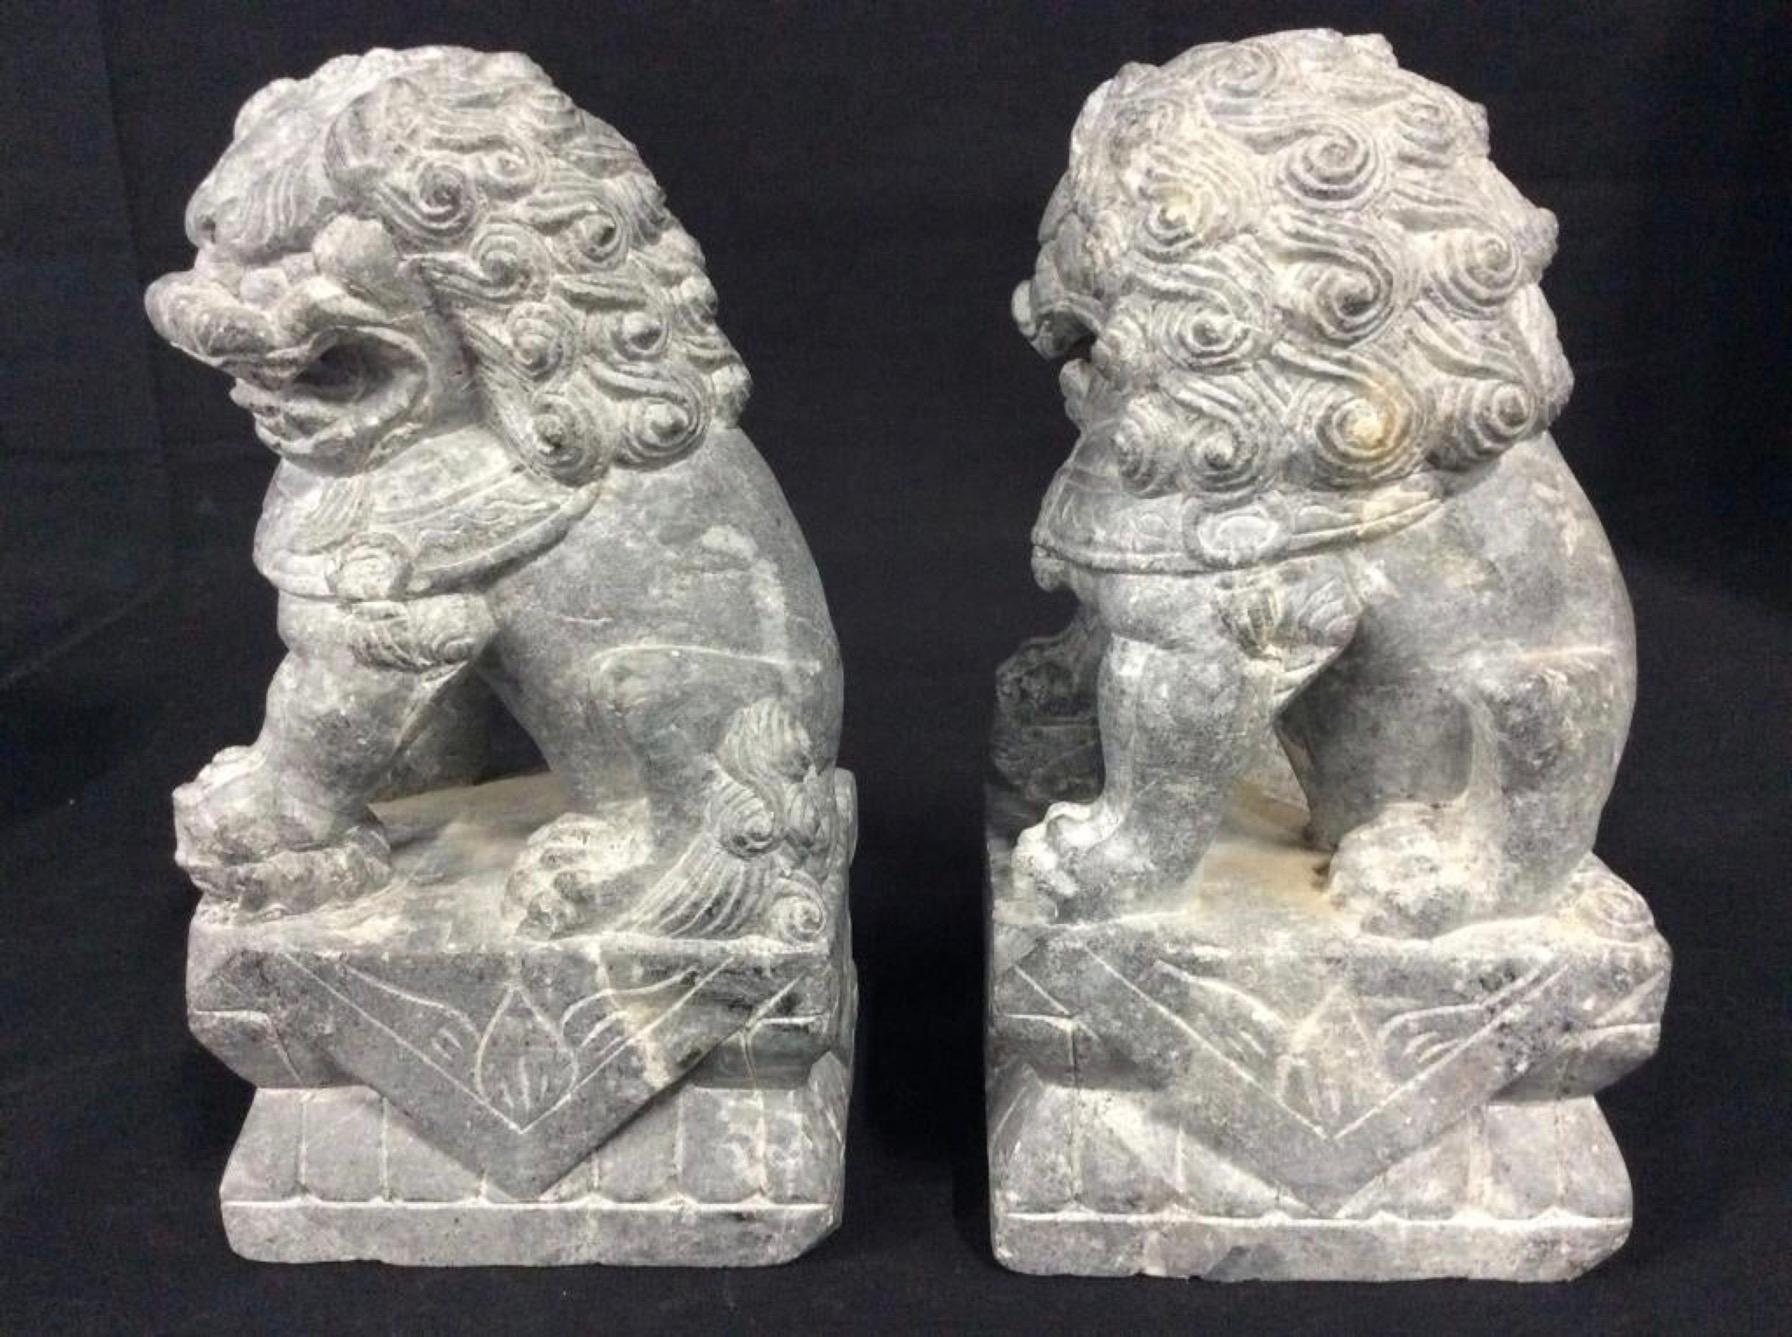 Pair of foo or Fu dogs carved from jade stone. Also known as Chinese foo dogs, Chinese temple dogs, temple lions stone sculpture.
The lions or dogs serve as stone sentinels an iconic gatekeeper seen throughout Asia. Traditional symbol of protection,